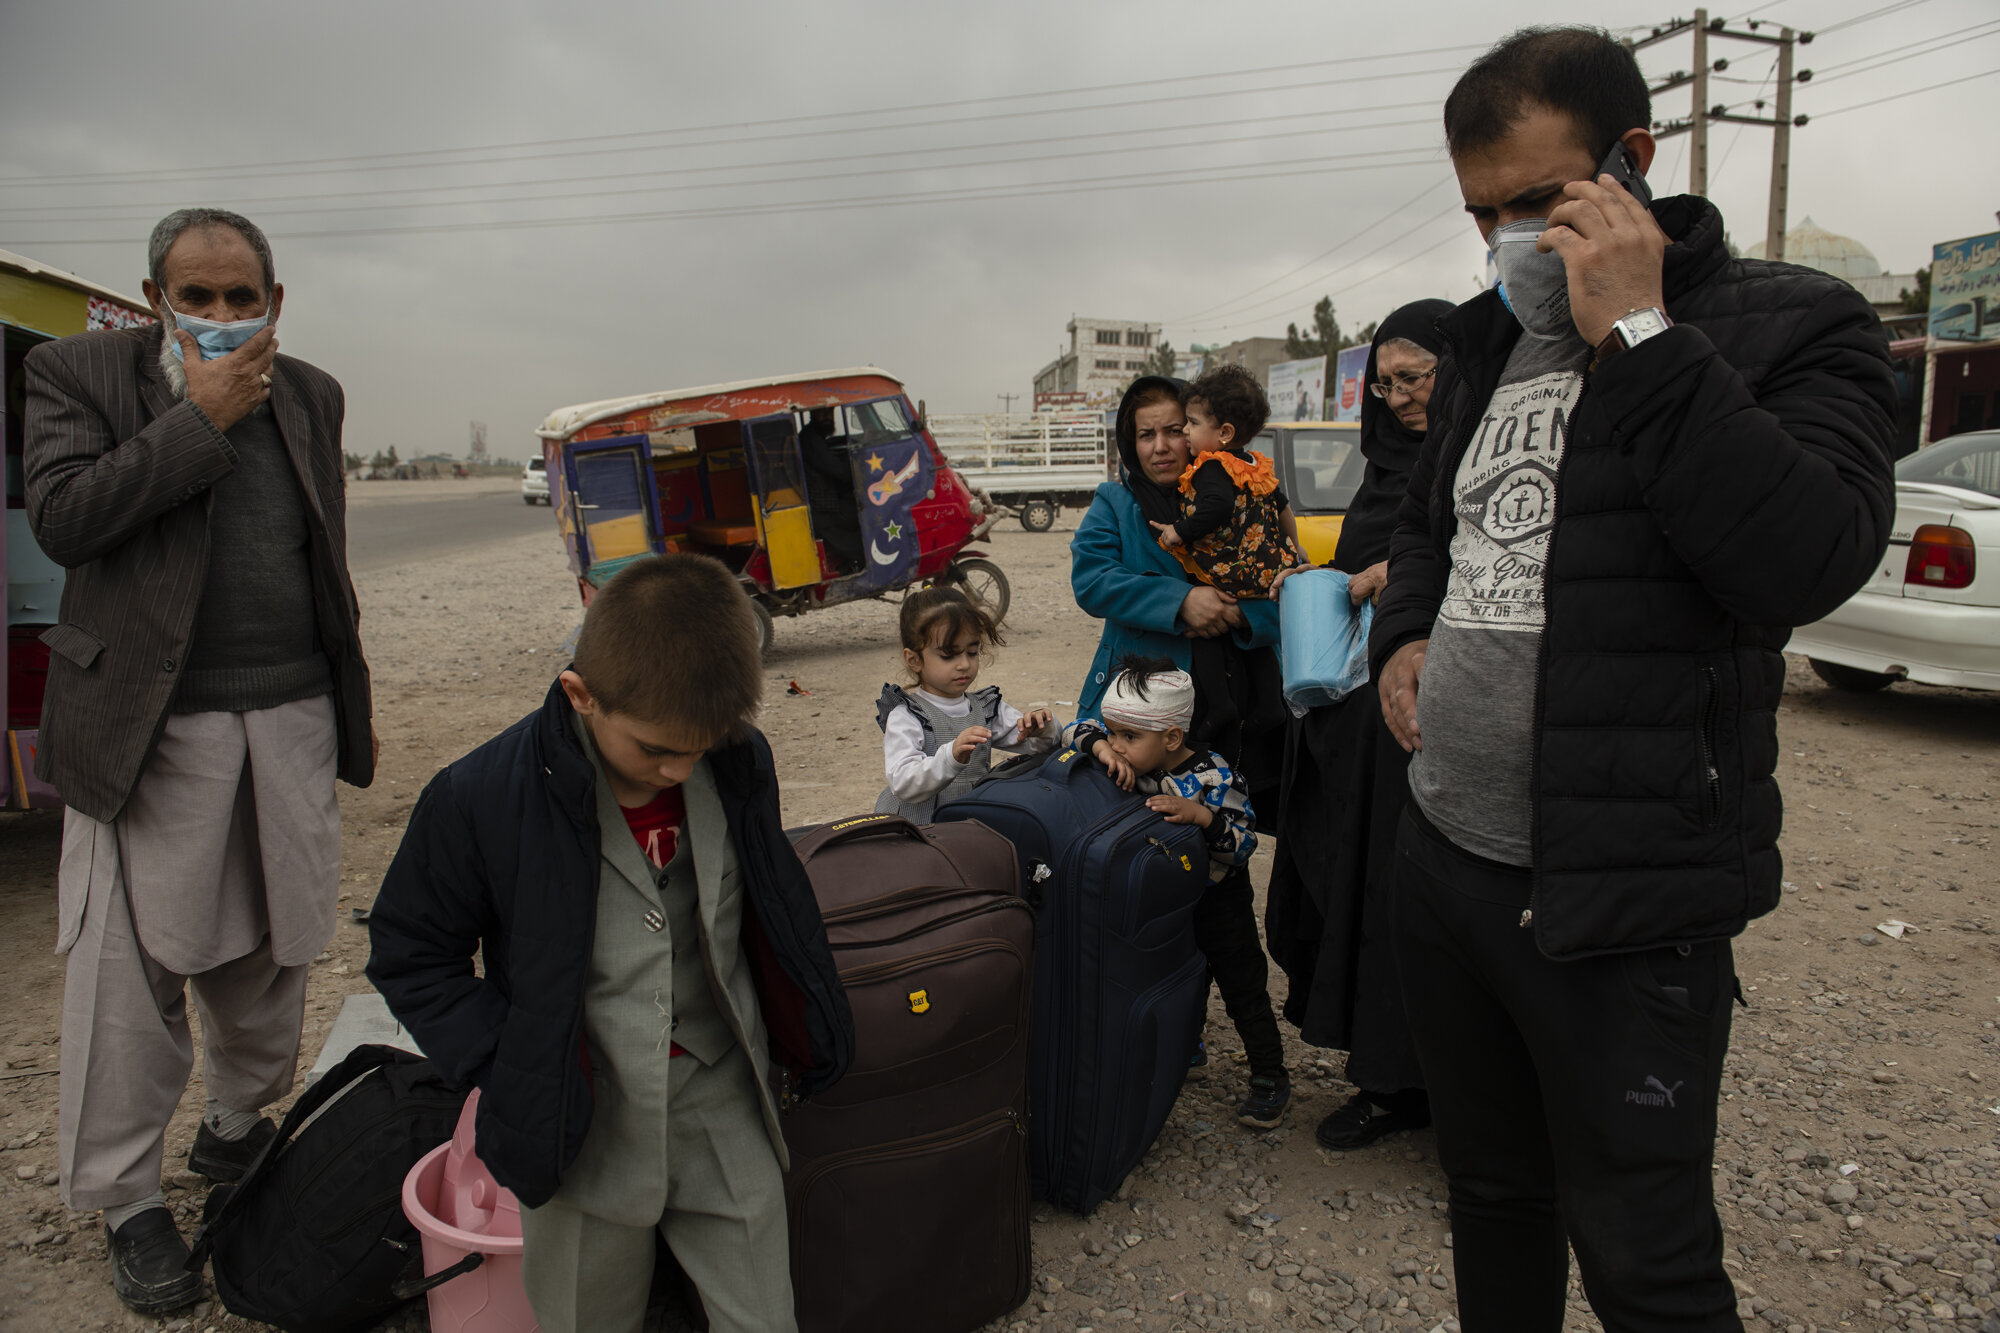  The Sayedkhili family, a family of 15, crossed the border from Iran into Afghanistan on March 18, 2020. The family left Afghanistan in search of a new life abroad, but returned after seven years because of the outbreak of Covid-19 in Iran. After bei